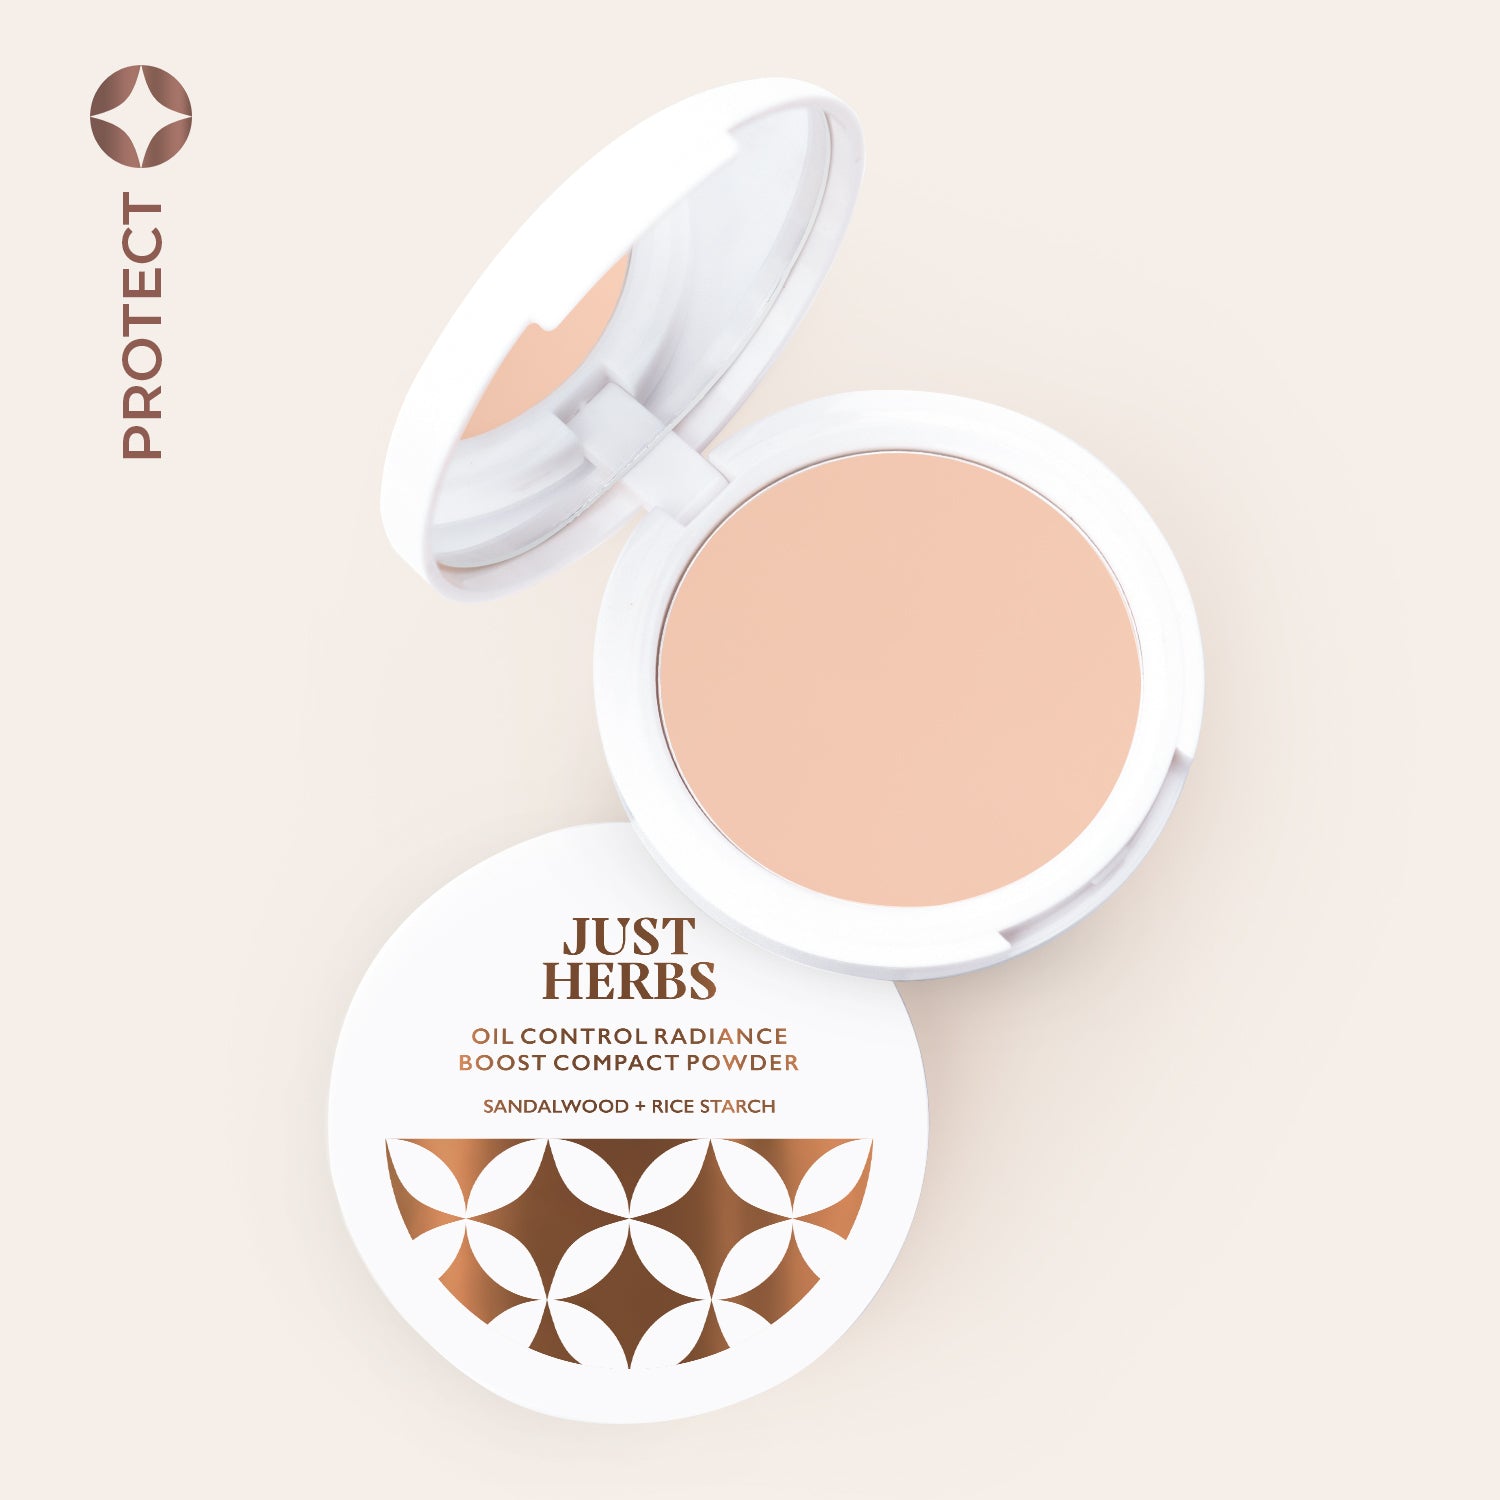 

Oil Control Radiance Boost Compact Powder with Sandalwood & Rice Starch, 01-porcelain